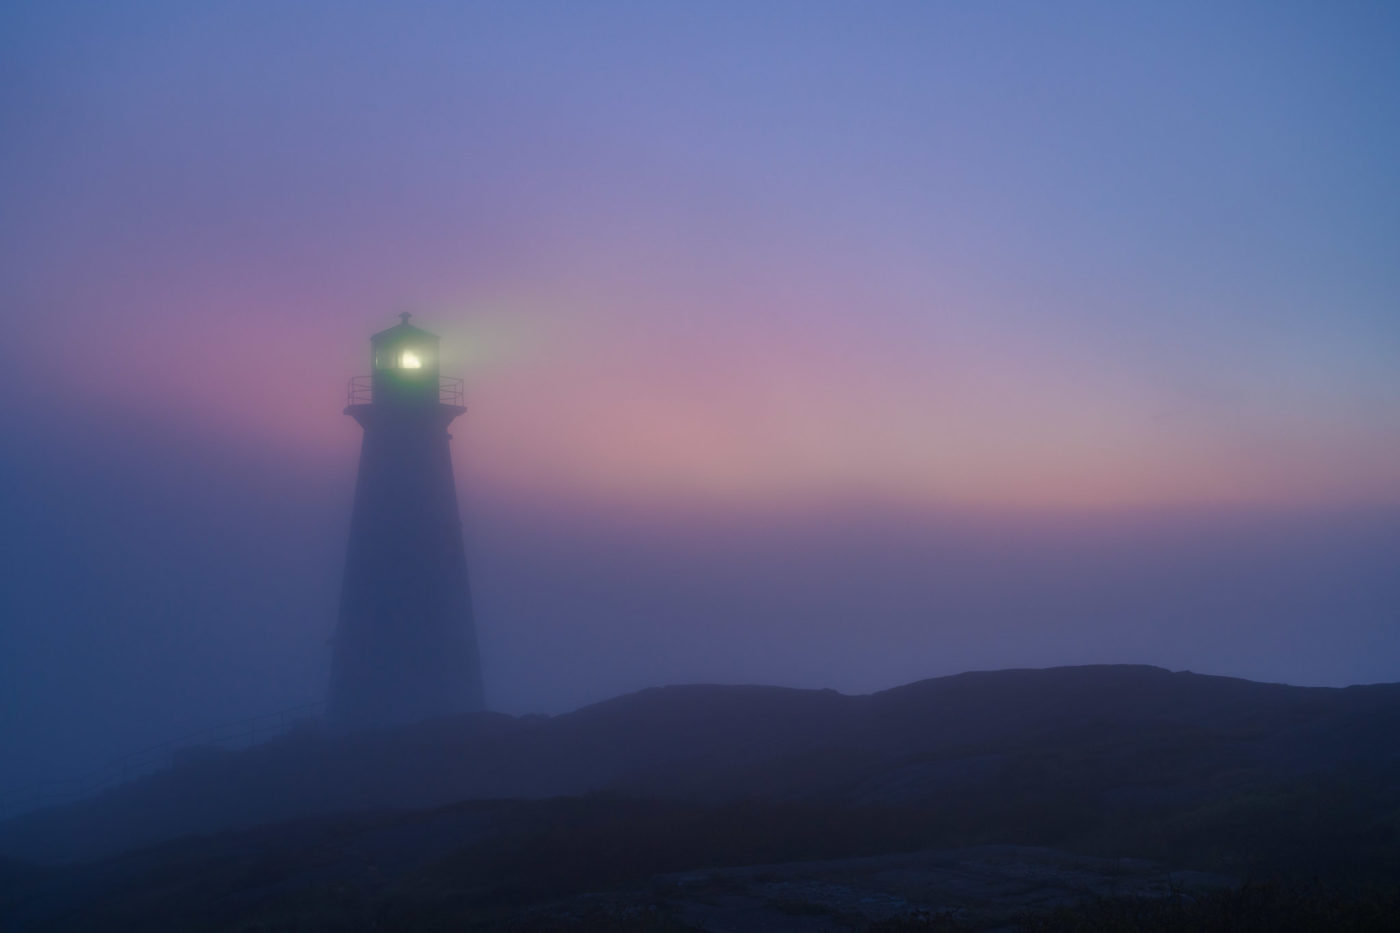 Cape Spear Lighthouse, St. John's, Newfoundland, Canada, in the fog with dawn glow in the sky.